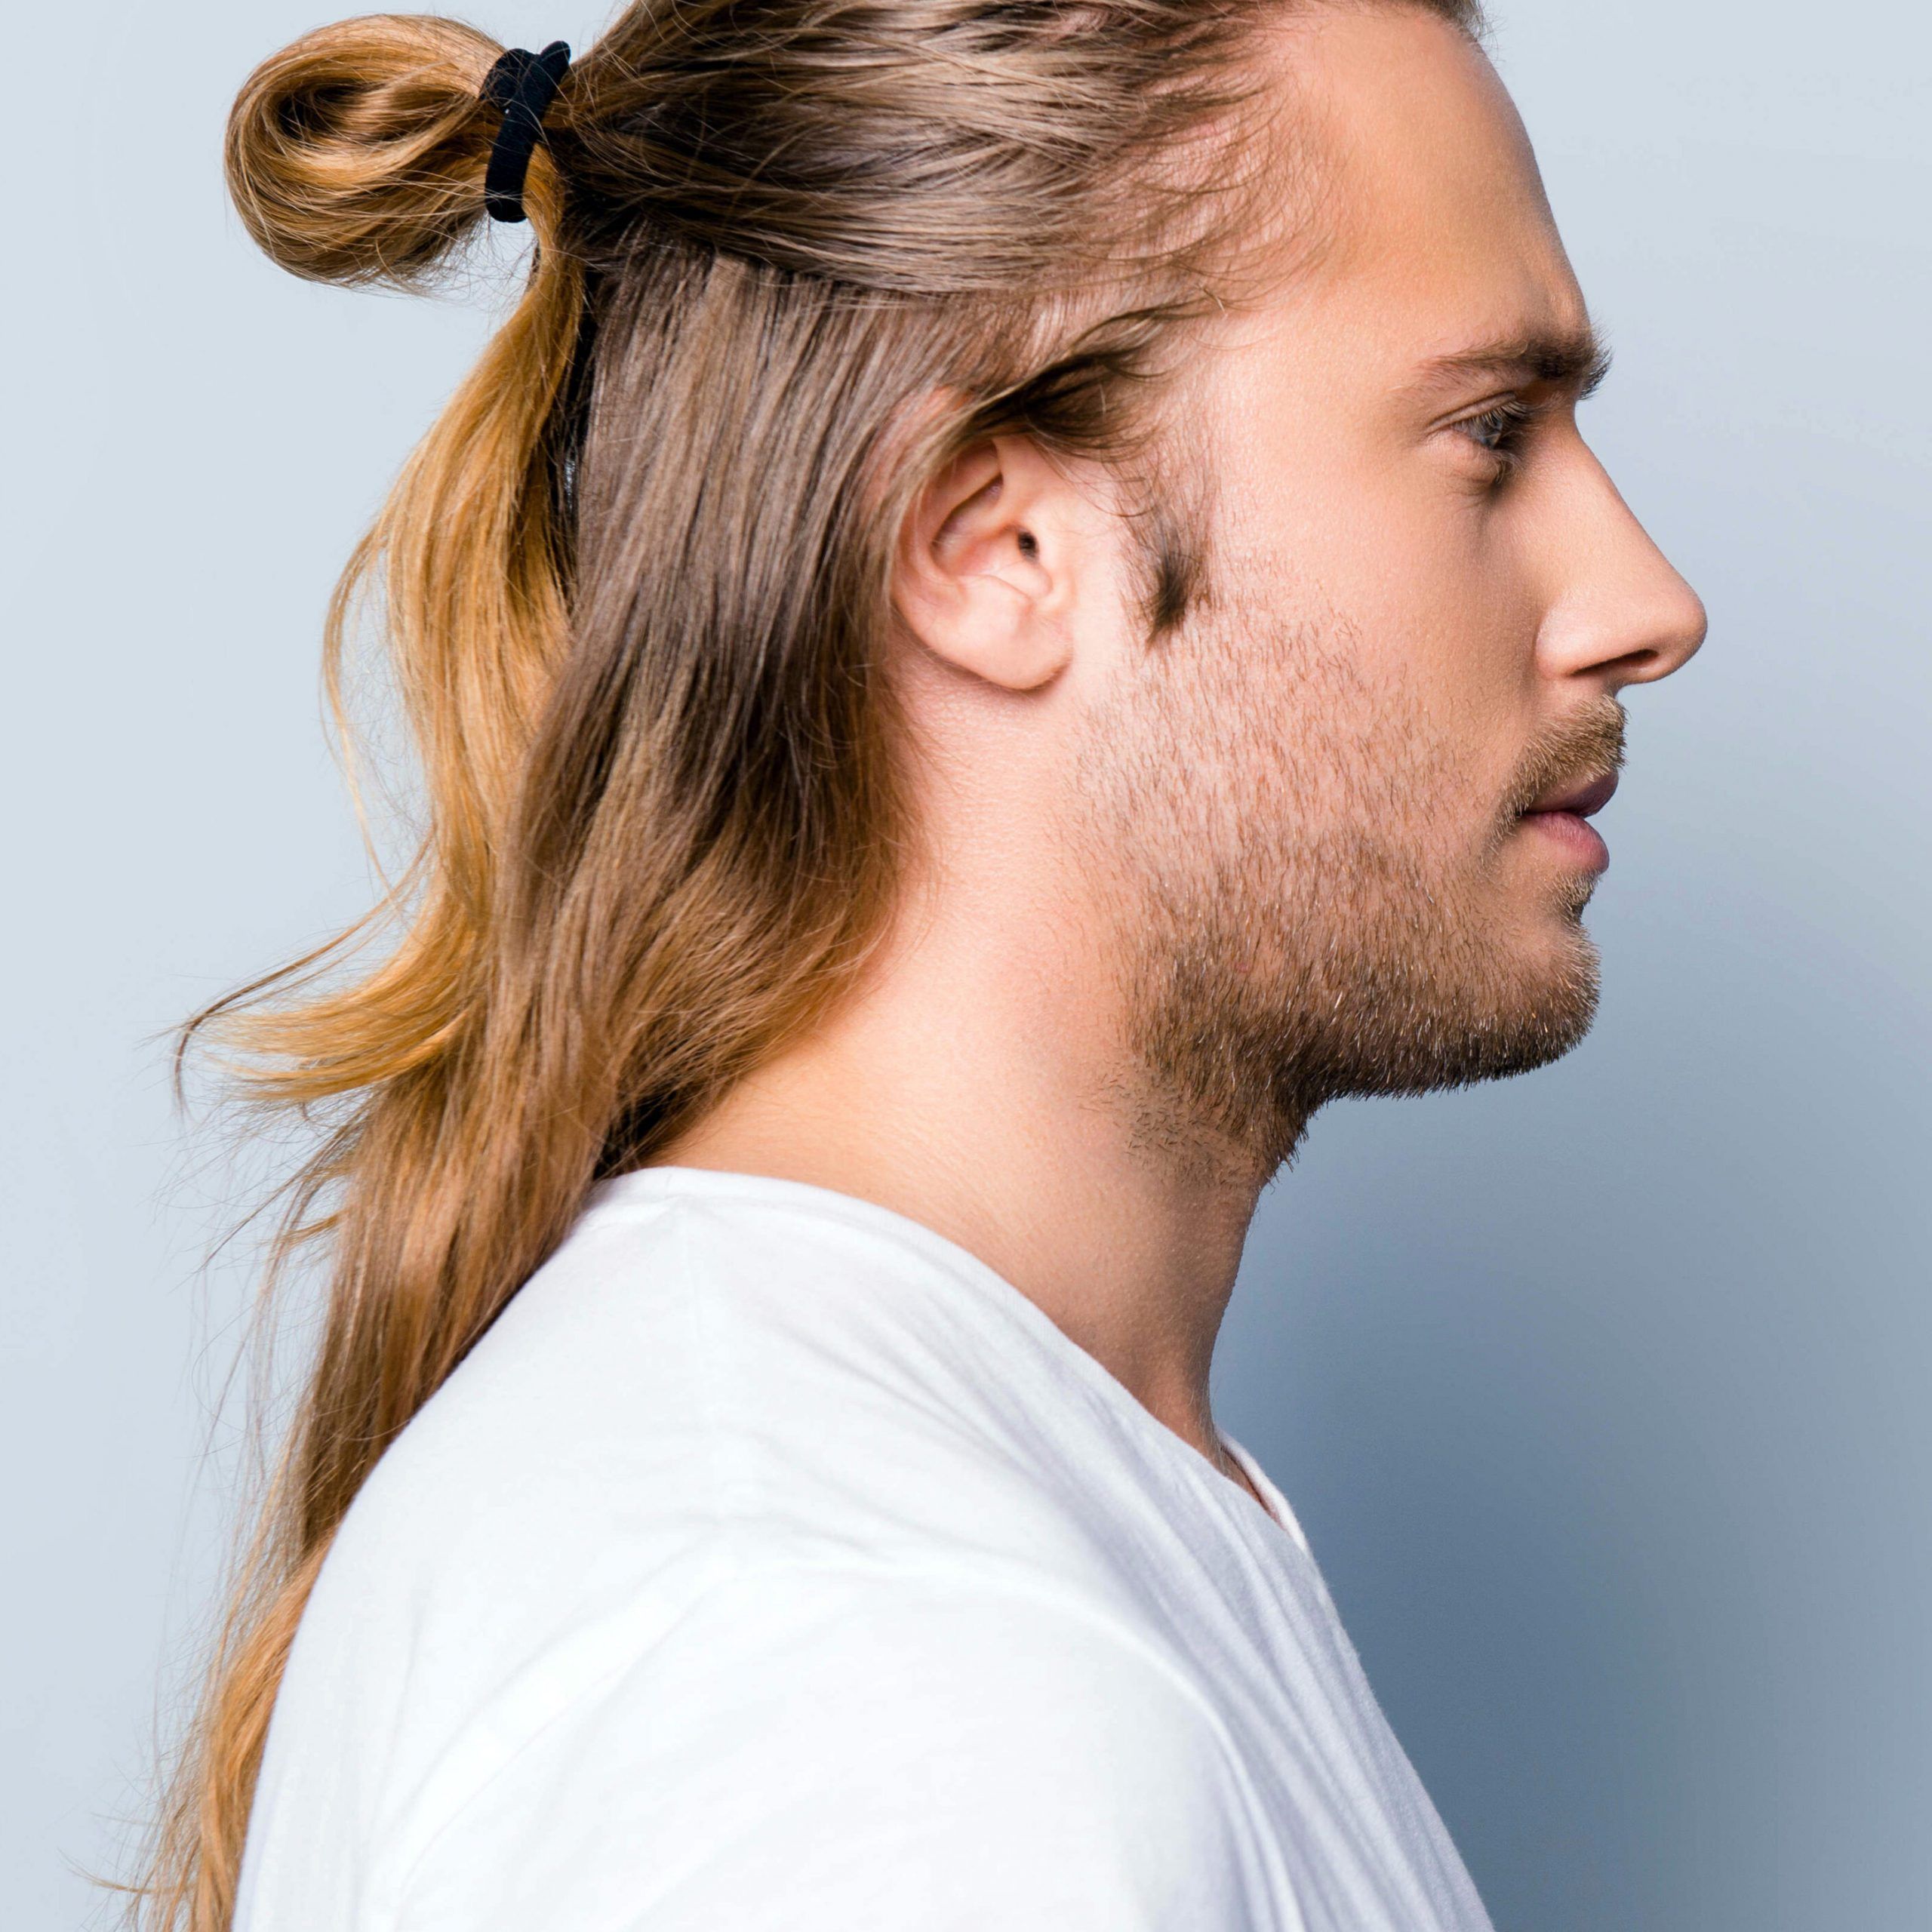 40 Types Of Man Bun Hairstyles | Gallery + How To | Haircut Inspiration Intended For Best And Newest Medium Length Wavy Hairstyles With Top Knot (View 8 of 25)